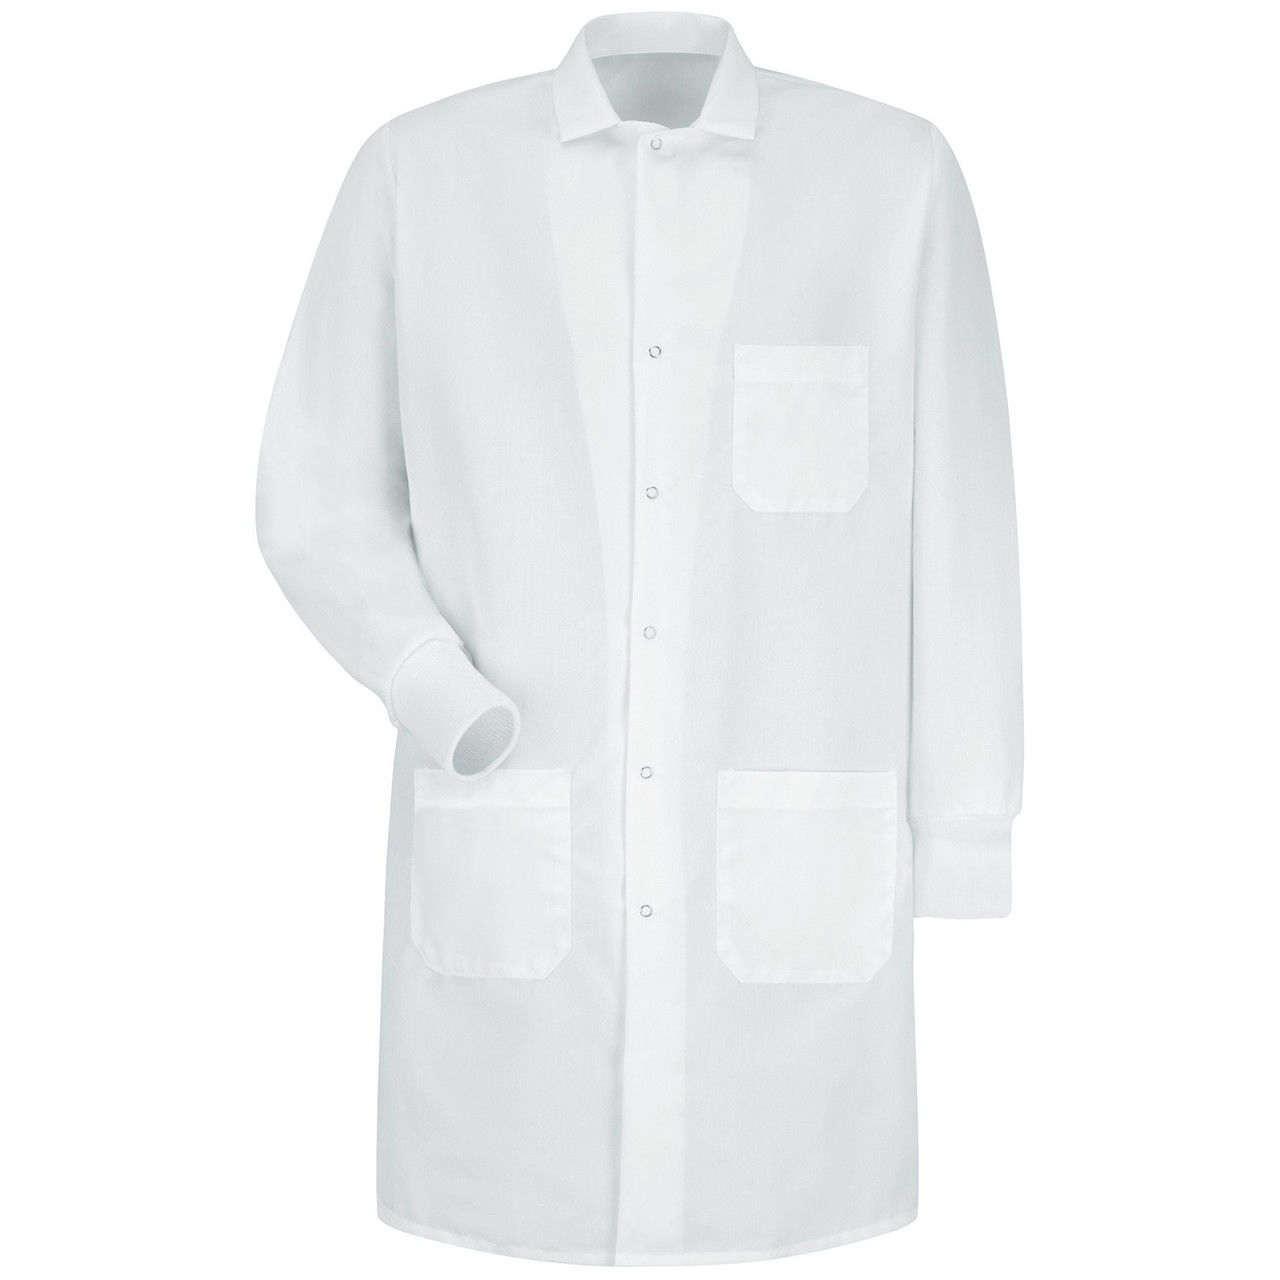 Does my lab coat cuffed sleeve order ship from your local warehouse?